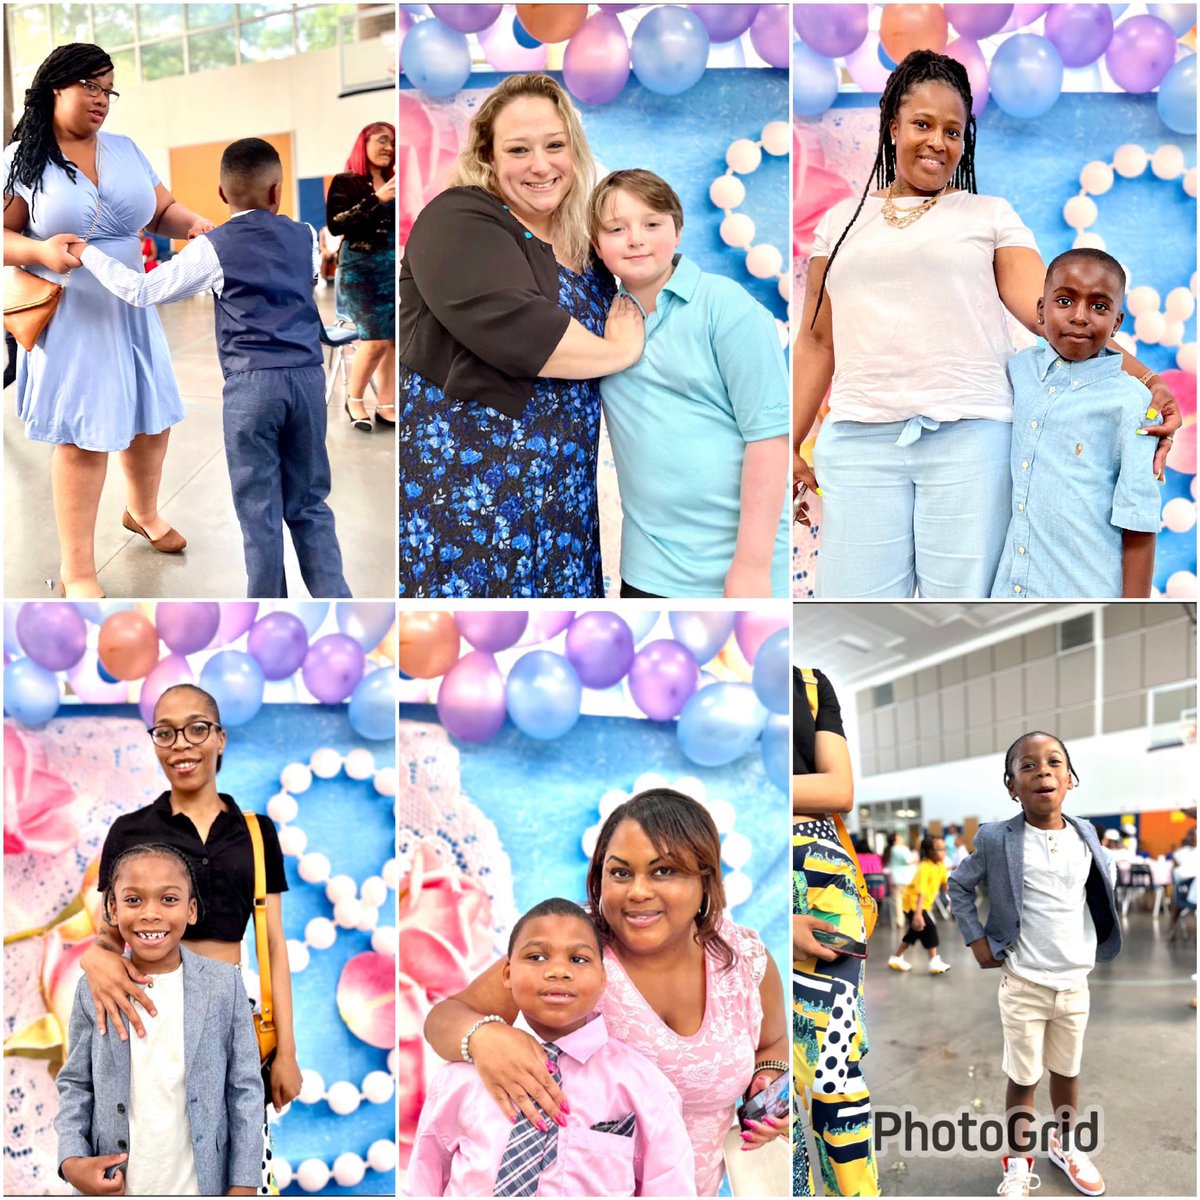 More pictures from our Mother-Son “Pastels in Paris” Dance on Wednesday night!! Enjoy!! #EagleNation #ppsStrong #CrES #PPS #MotherSon #MothersDay 💛💙🦅 @JolleyLa @PortsVASchools